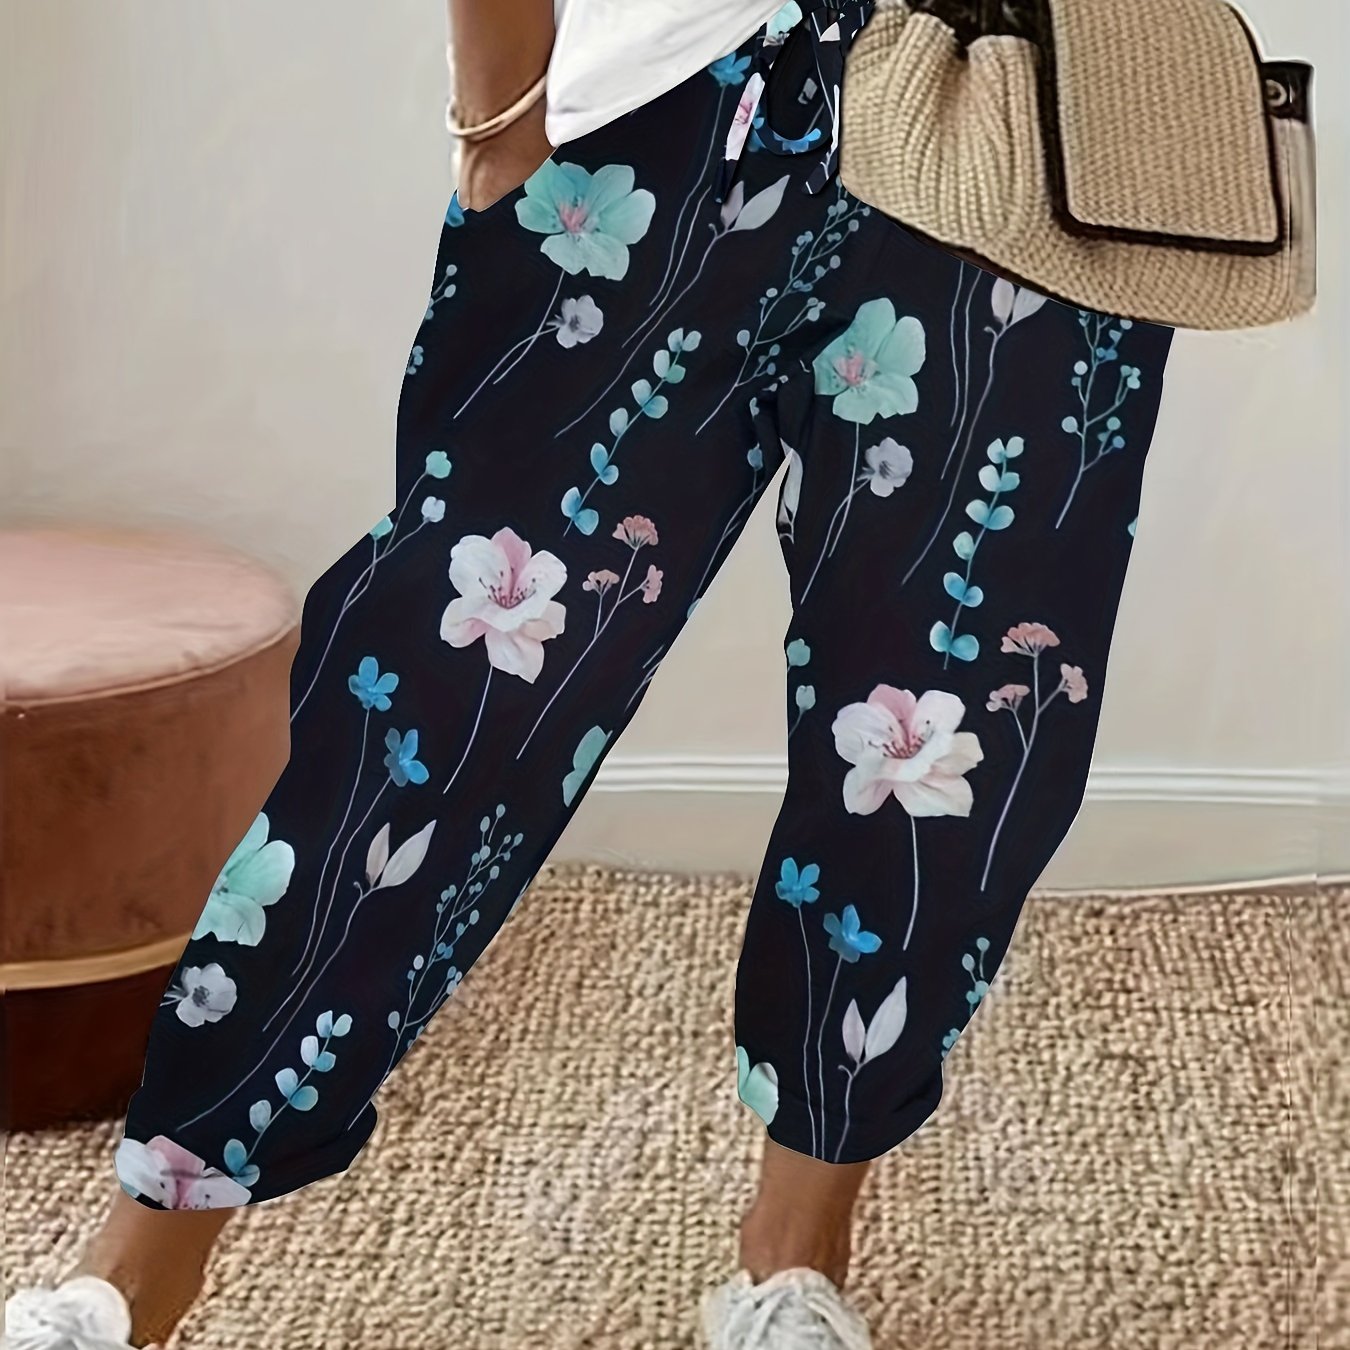 Floral Print Two-Tone Pants Style 241270